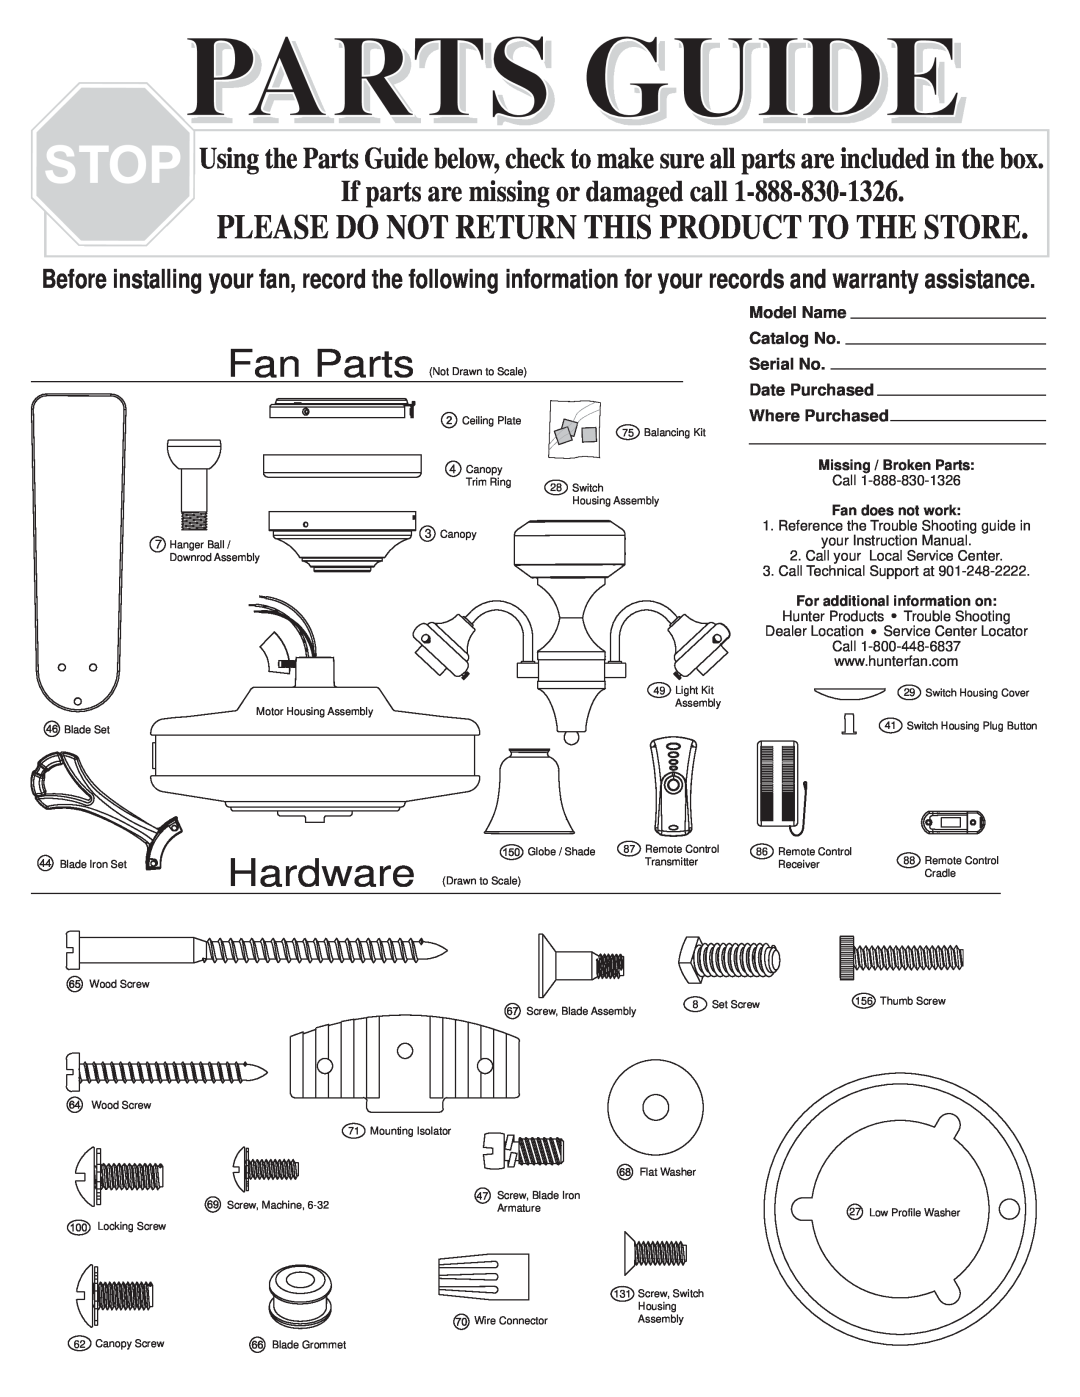 Hunter Fan 20345 warranty Model Name Catalog No Serial No Date Purchased, Where Purchased, Parts Guide, Hardware, Call 